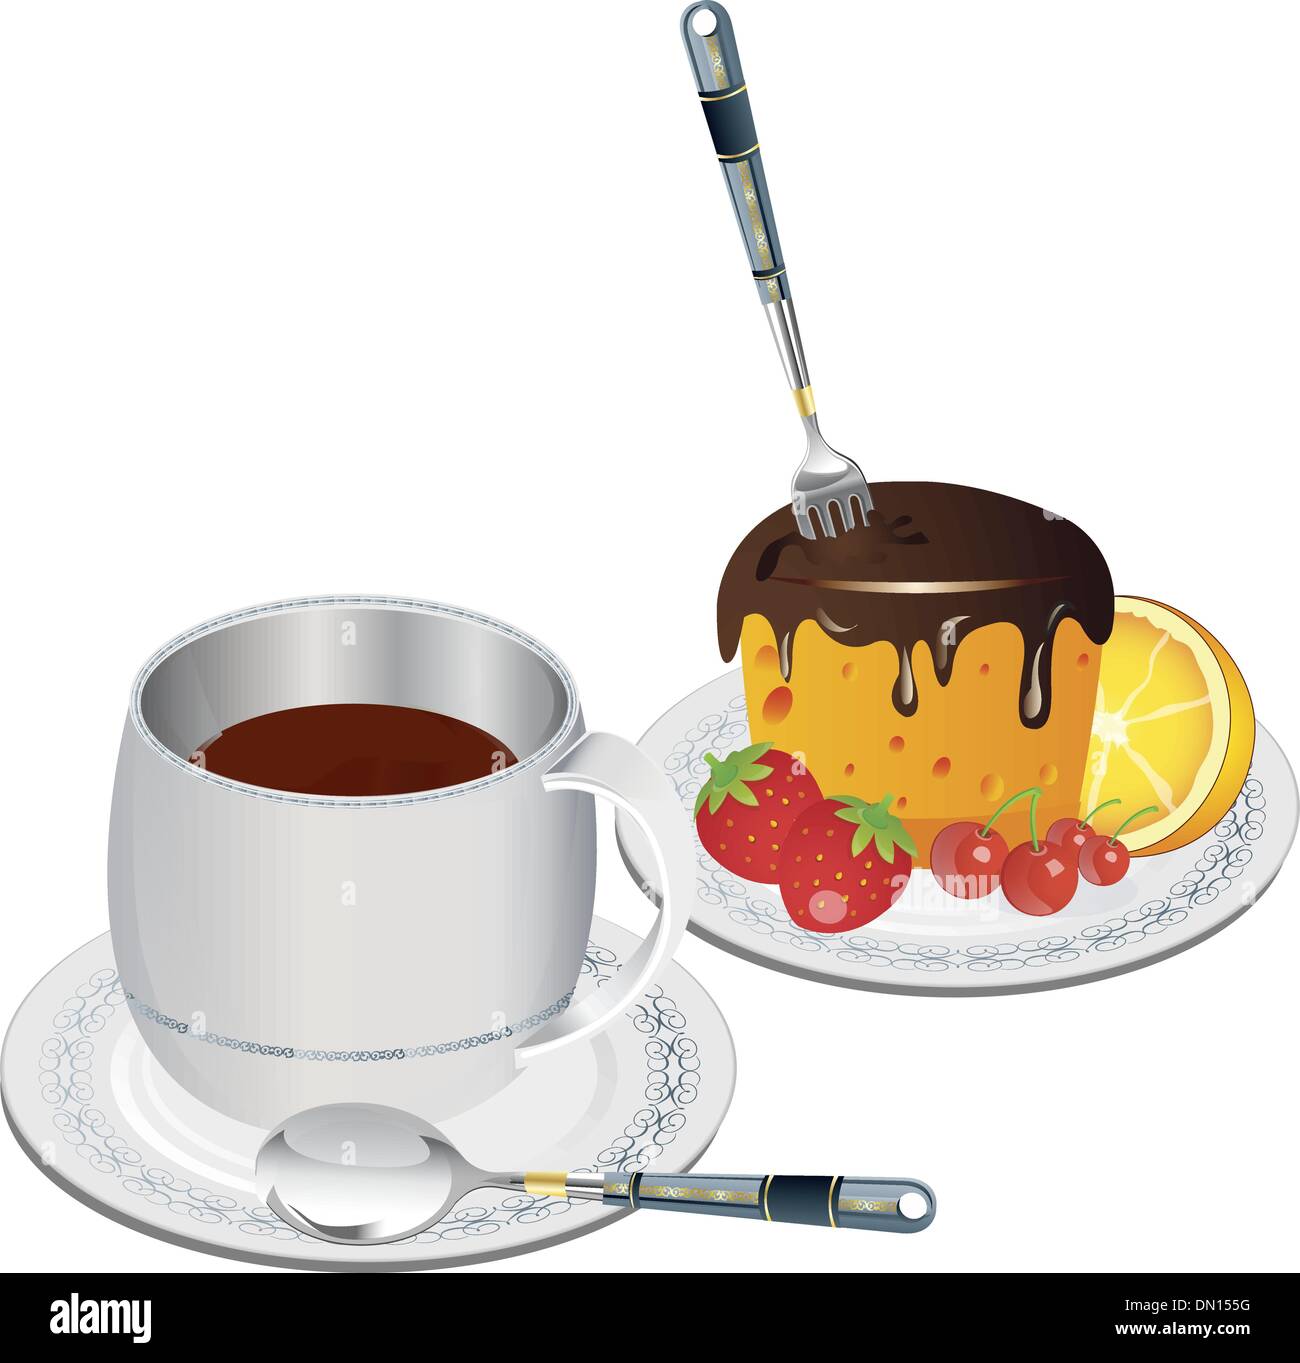 clip art coffee and cake Stock Vector